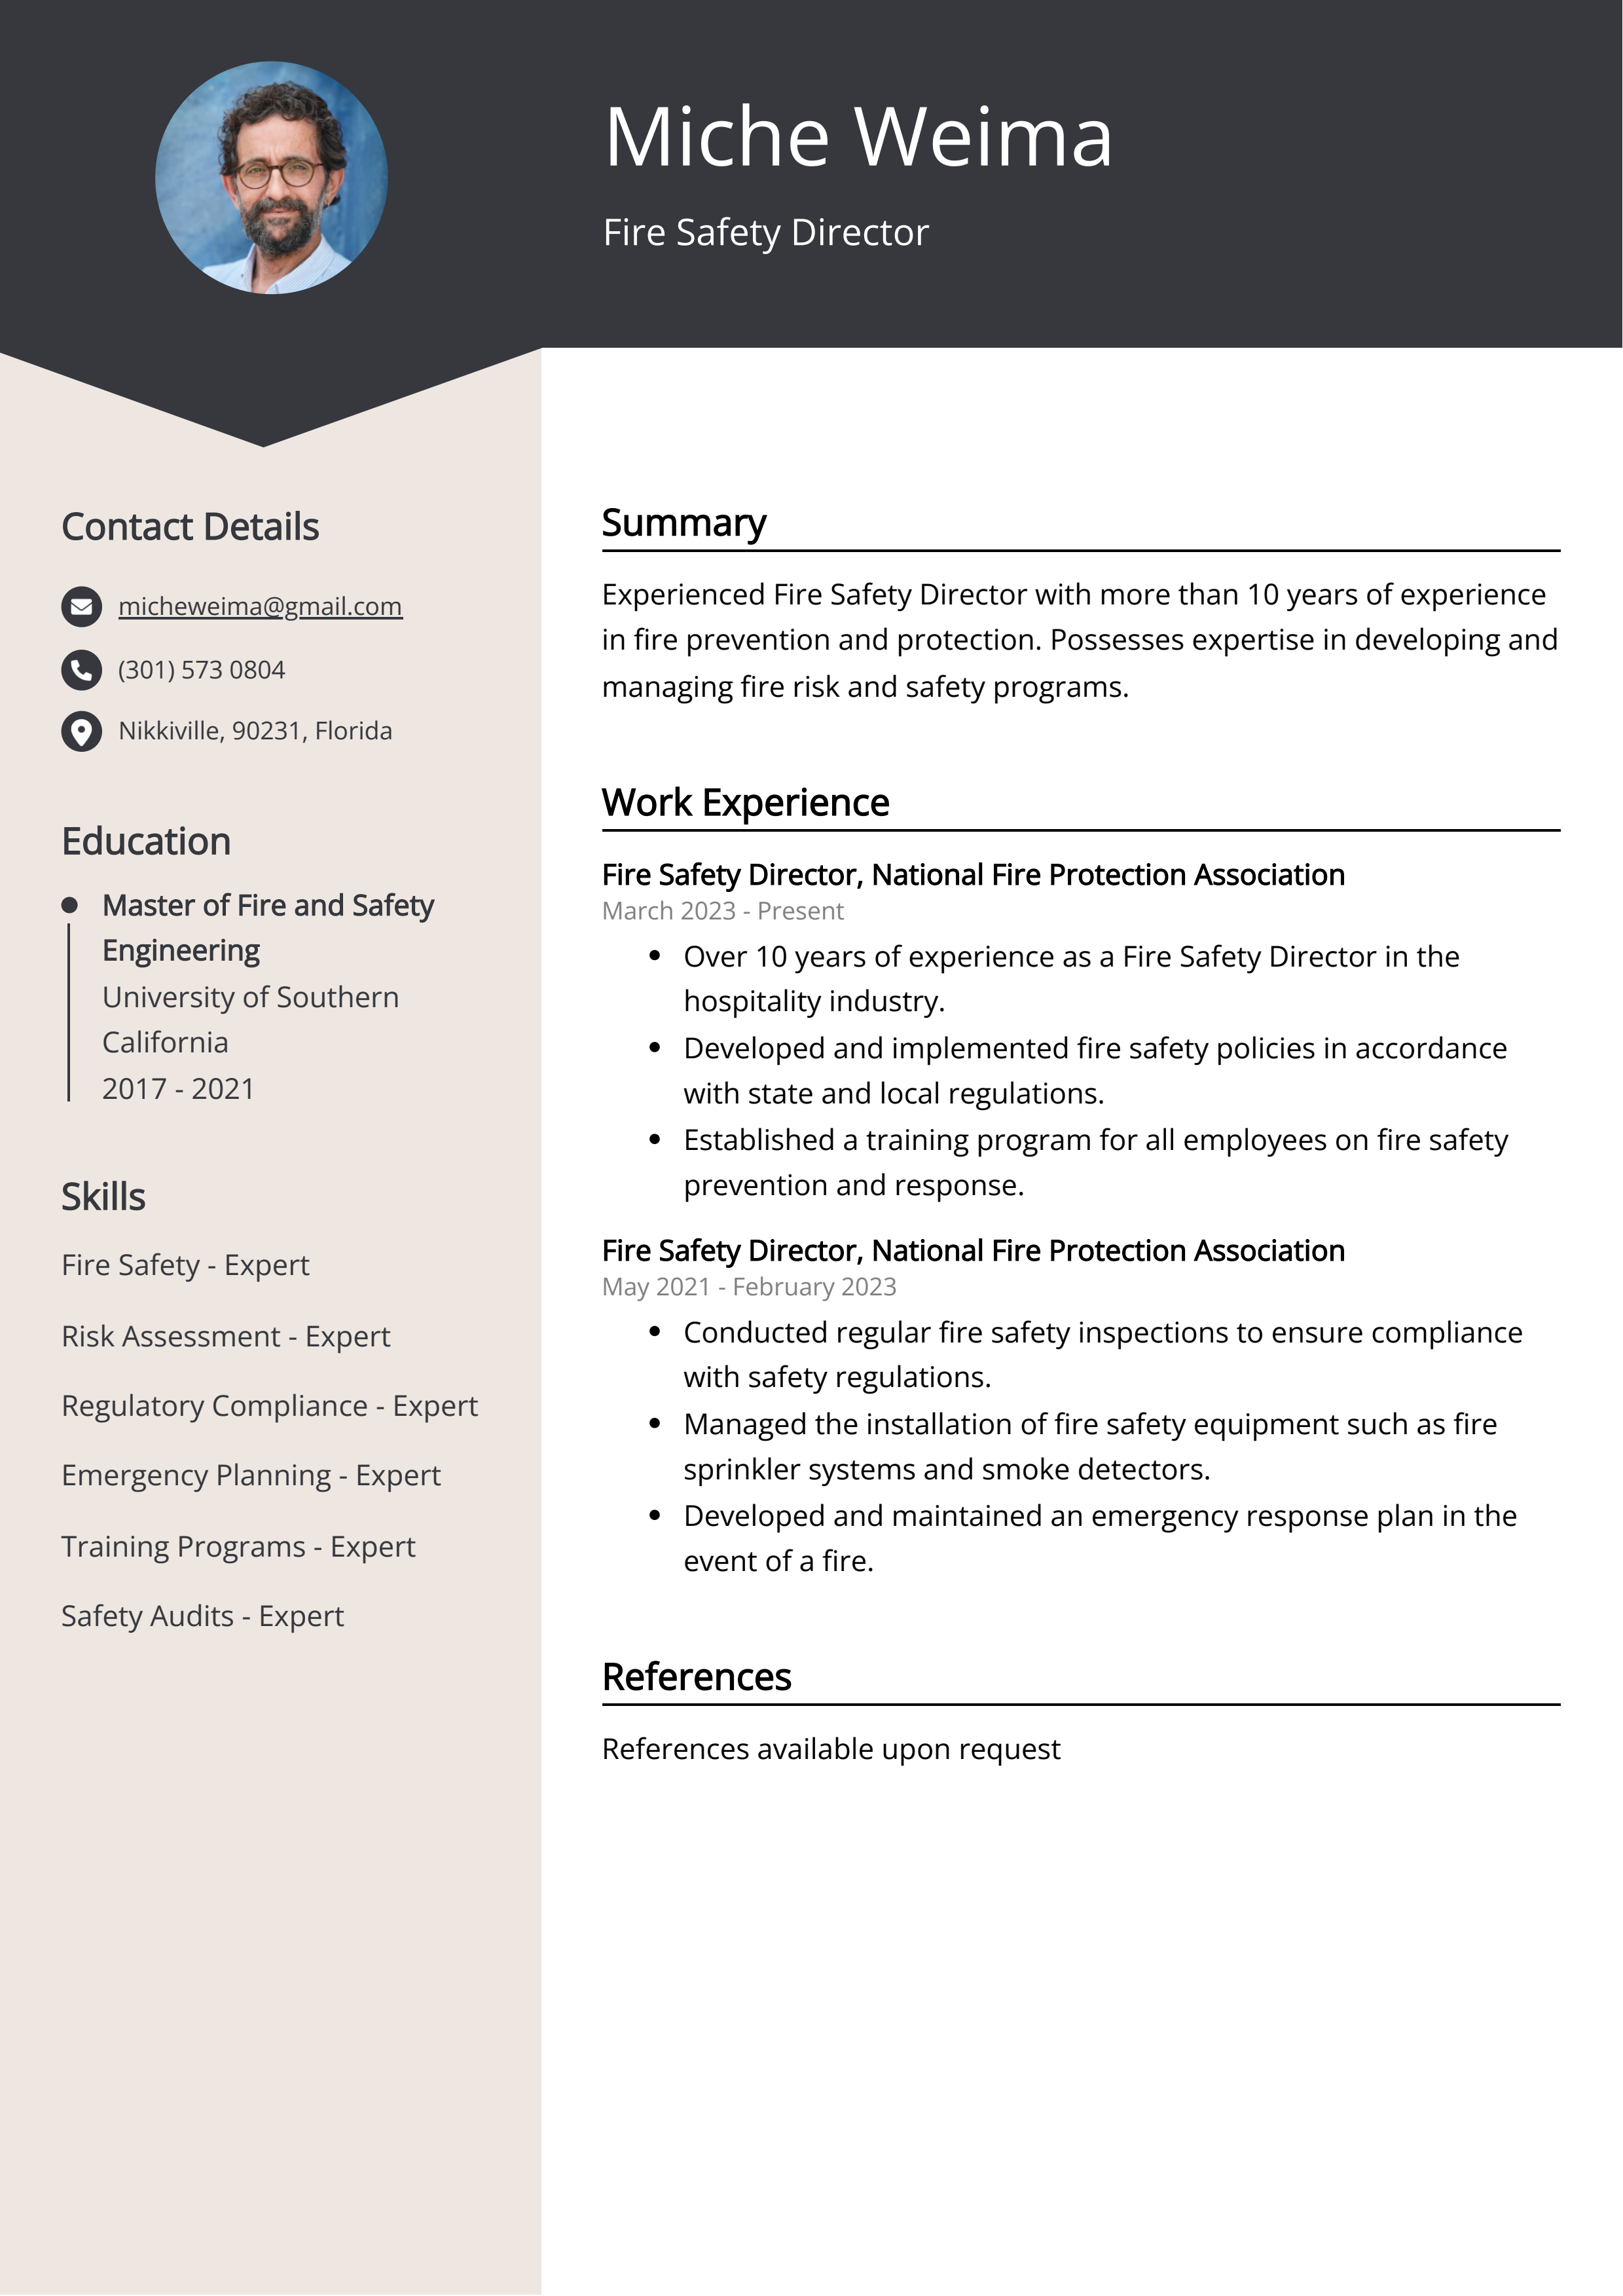 Fire Safety Director CV Example